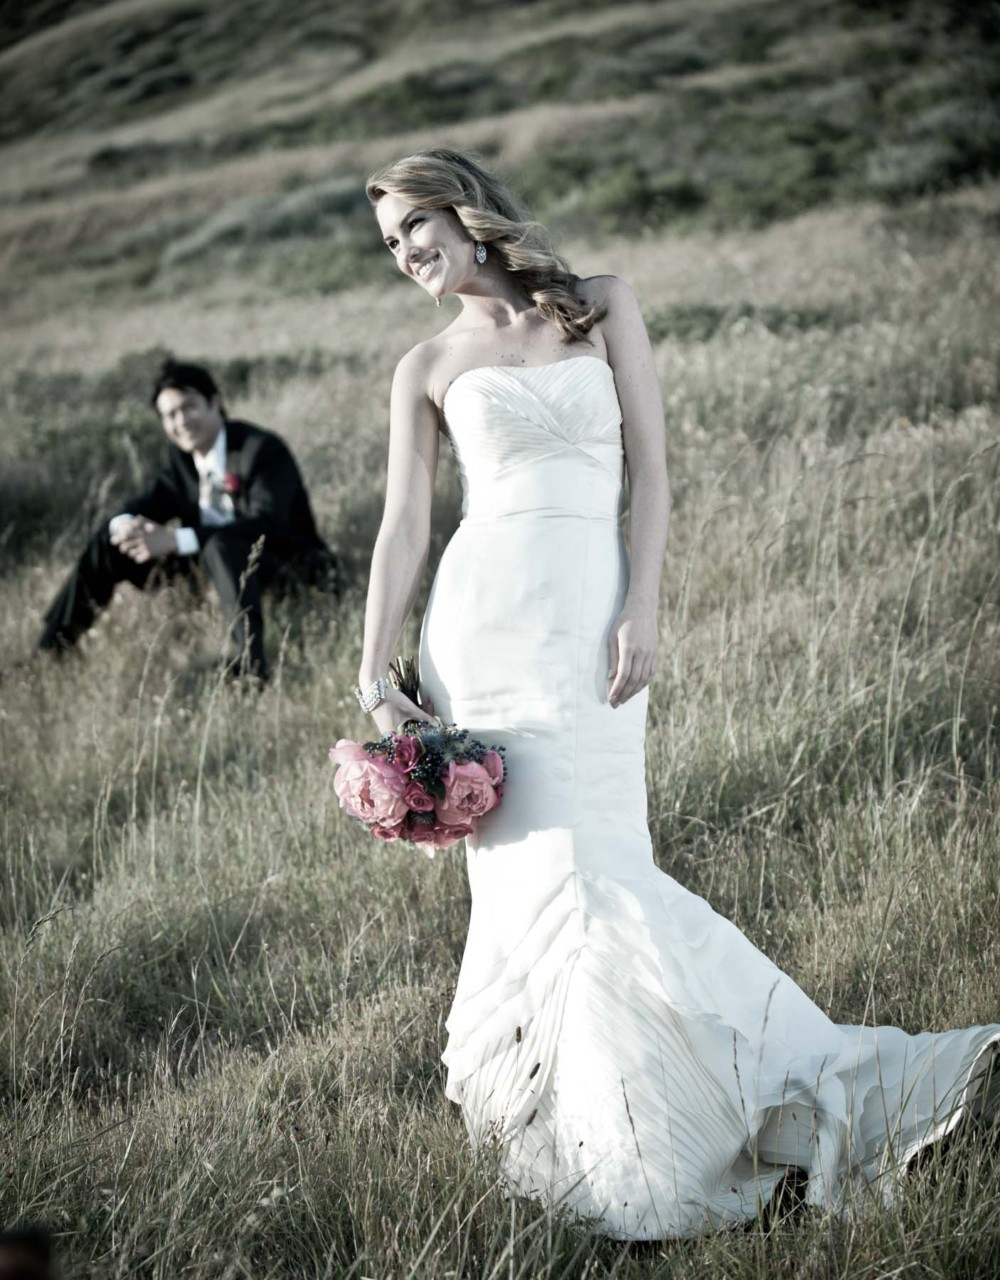 Looking for a professional wedding photographer in Girdwood?